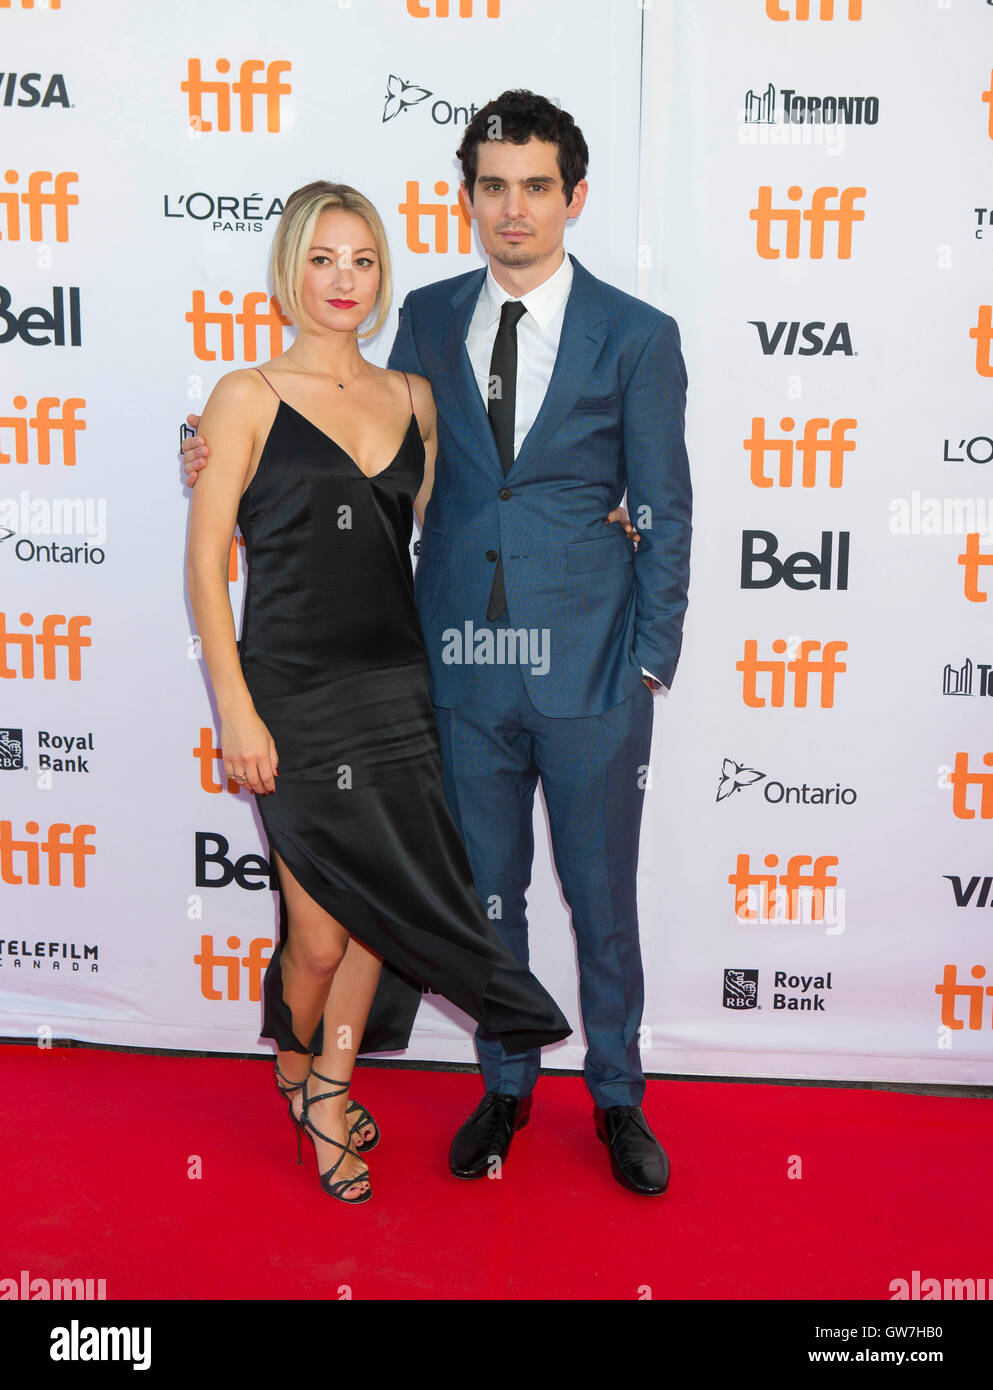 Toronto, Canada. 12th Sep, 2016. Director Damien Chazelle (R) and actress Olivia Hamilton pose for photos before the Canadian premiere of the film 'La La Land' at the Princess of Wales Theater during the 41st Toronto International Film Festival in Toronto, Canada, Sept. 12, 2016. Credit:  Zou Zheng/Xinhua/Alamy Live News Stock Photo